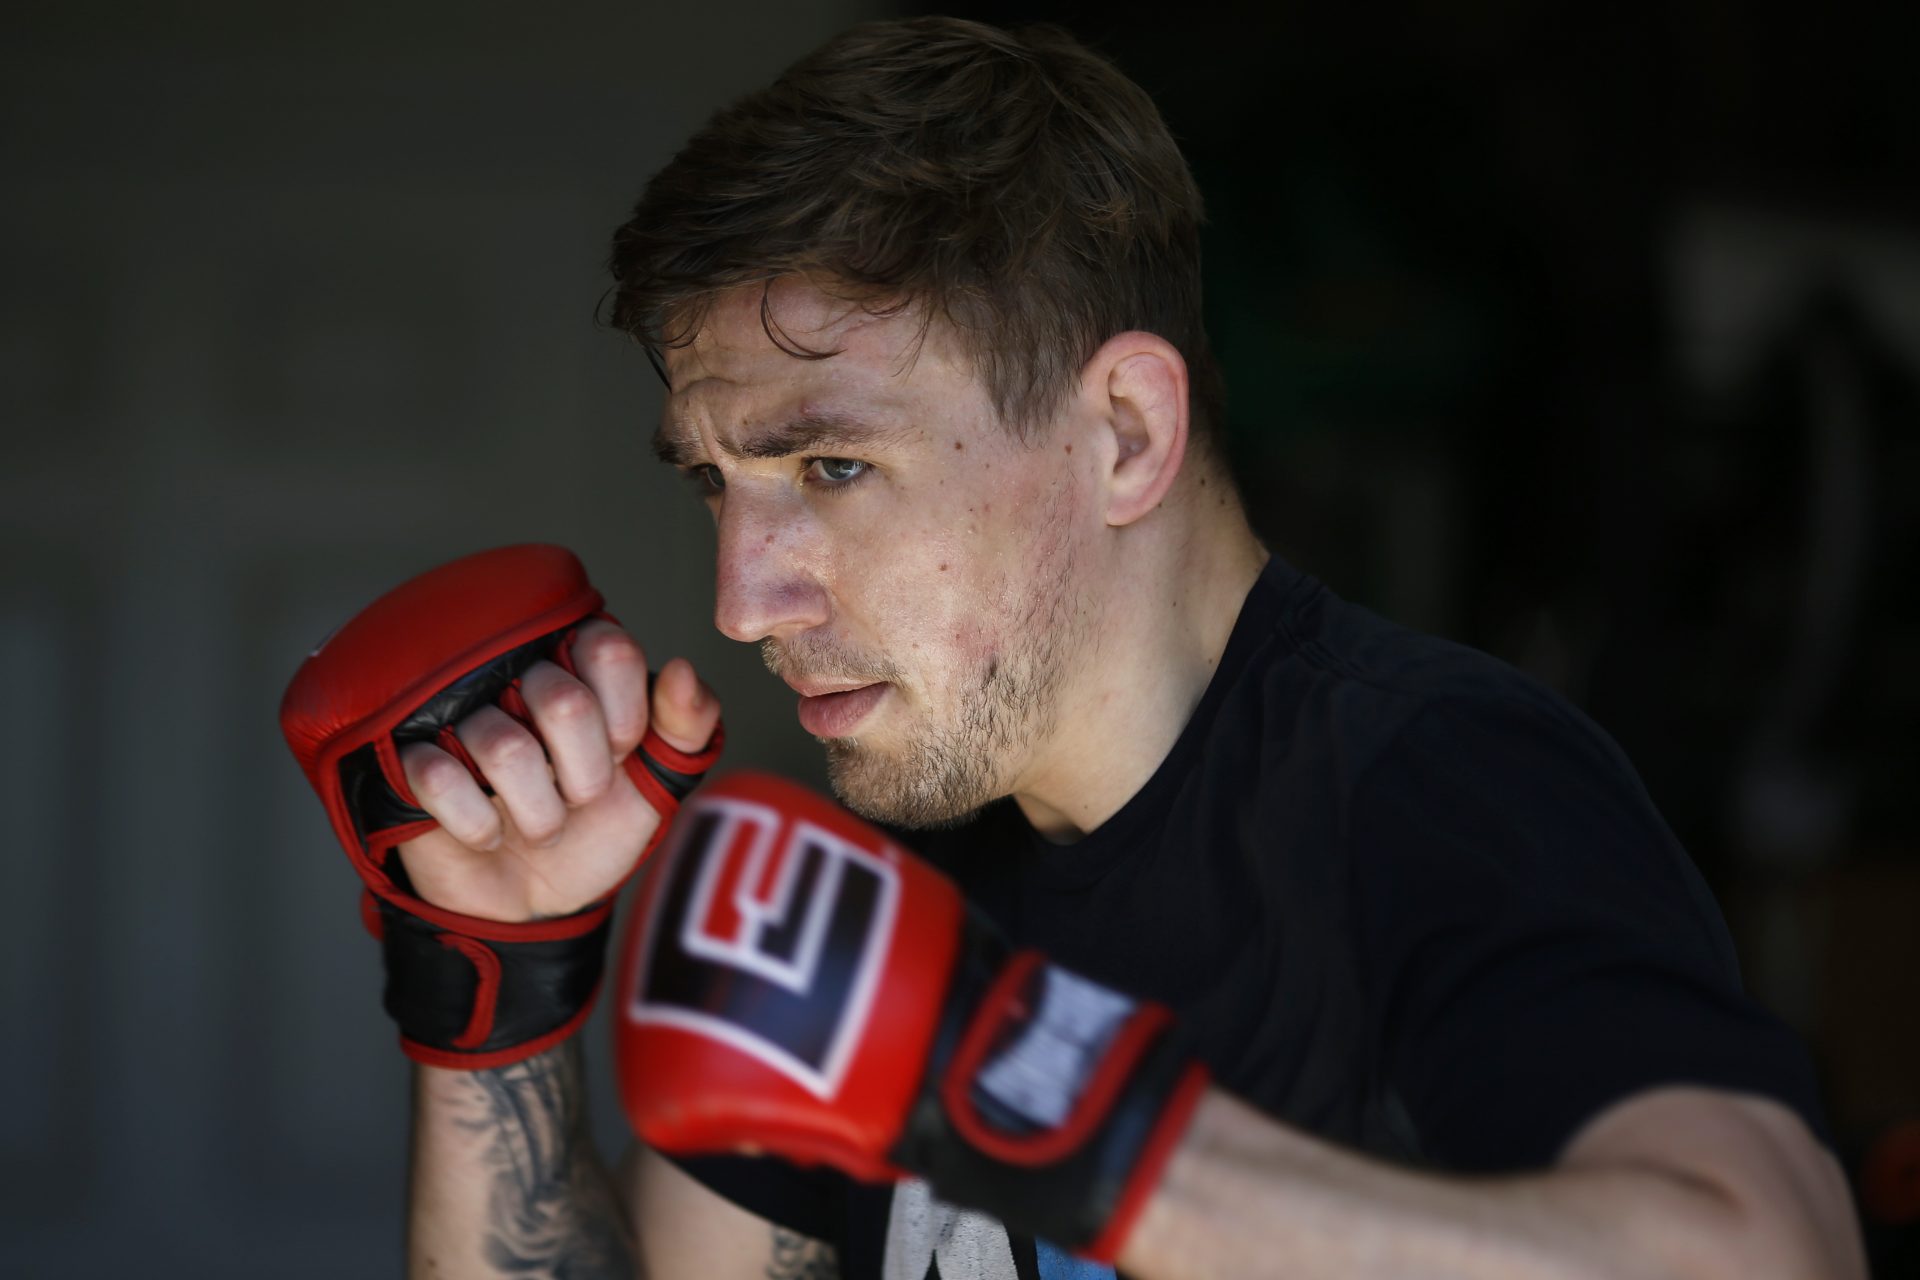 Fighter Kyle Daukaus trains in his garage, Saturday, May 2, 2020, in Philadelphia. Daukaus, a rising star in the regional MMA promotion Cage Fury Fighting Championships, is still chasing his dream of getting the call to fight for UFC despite the coronavirus pandemic.